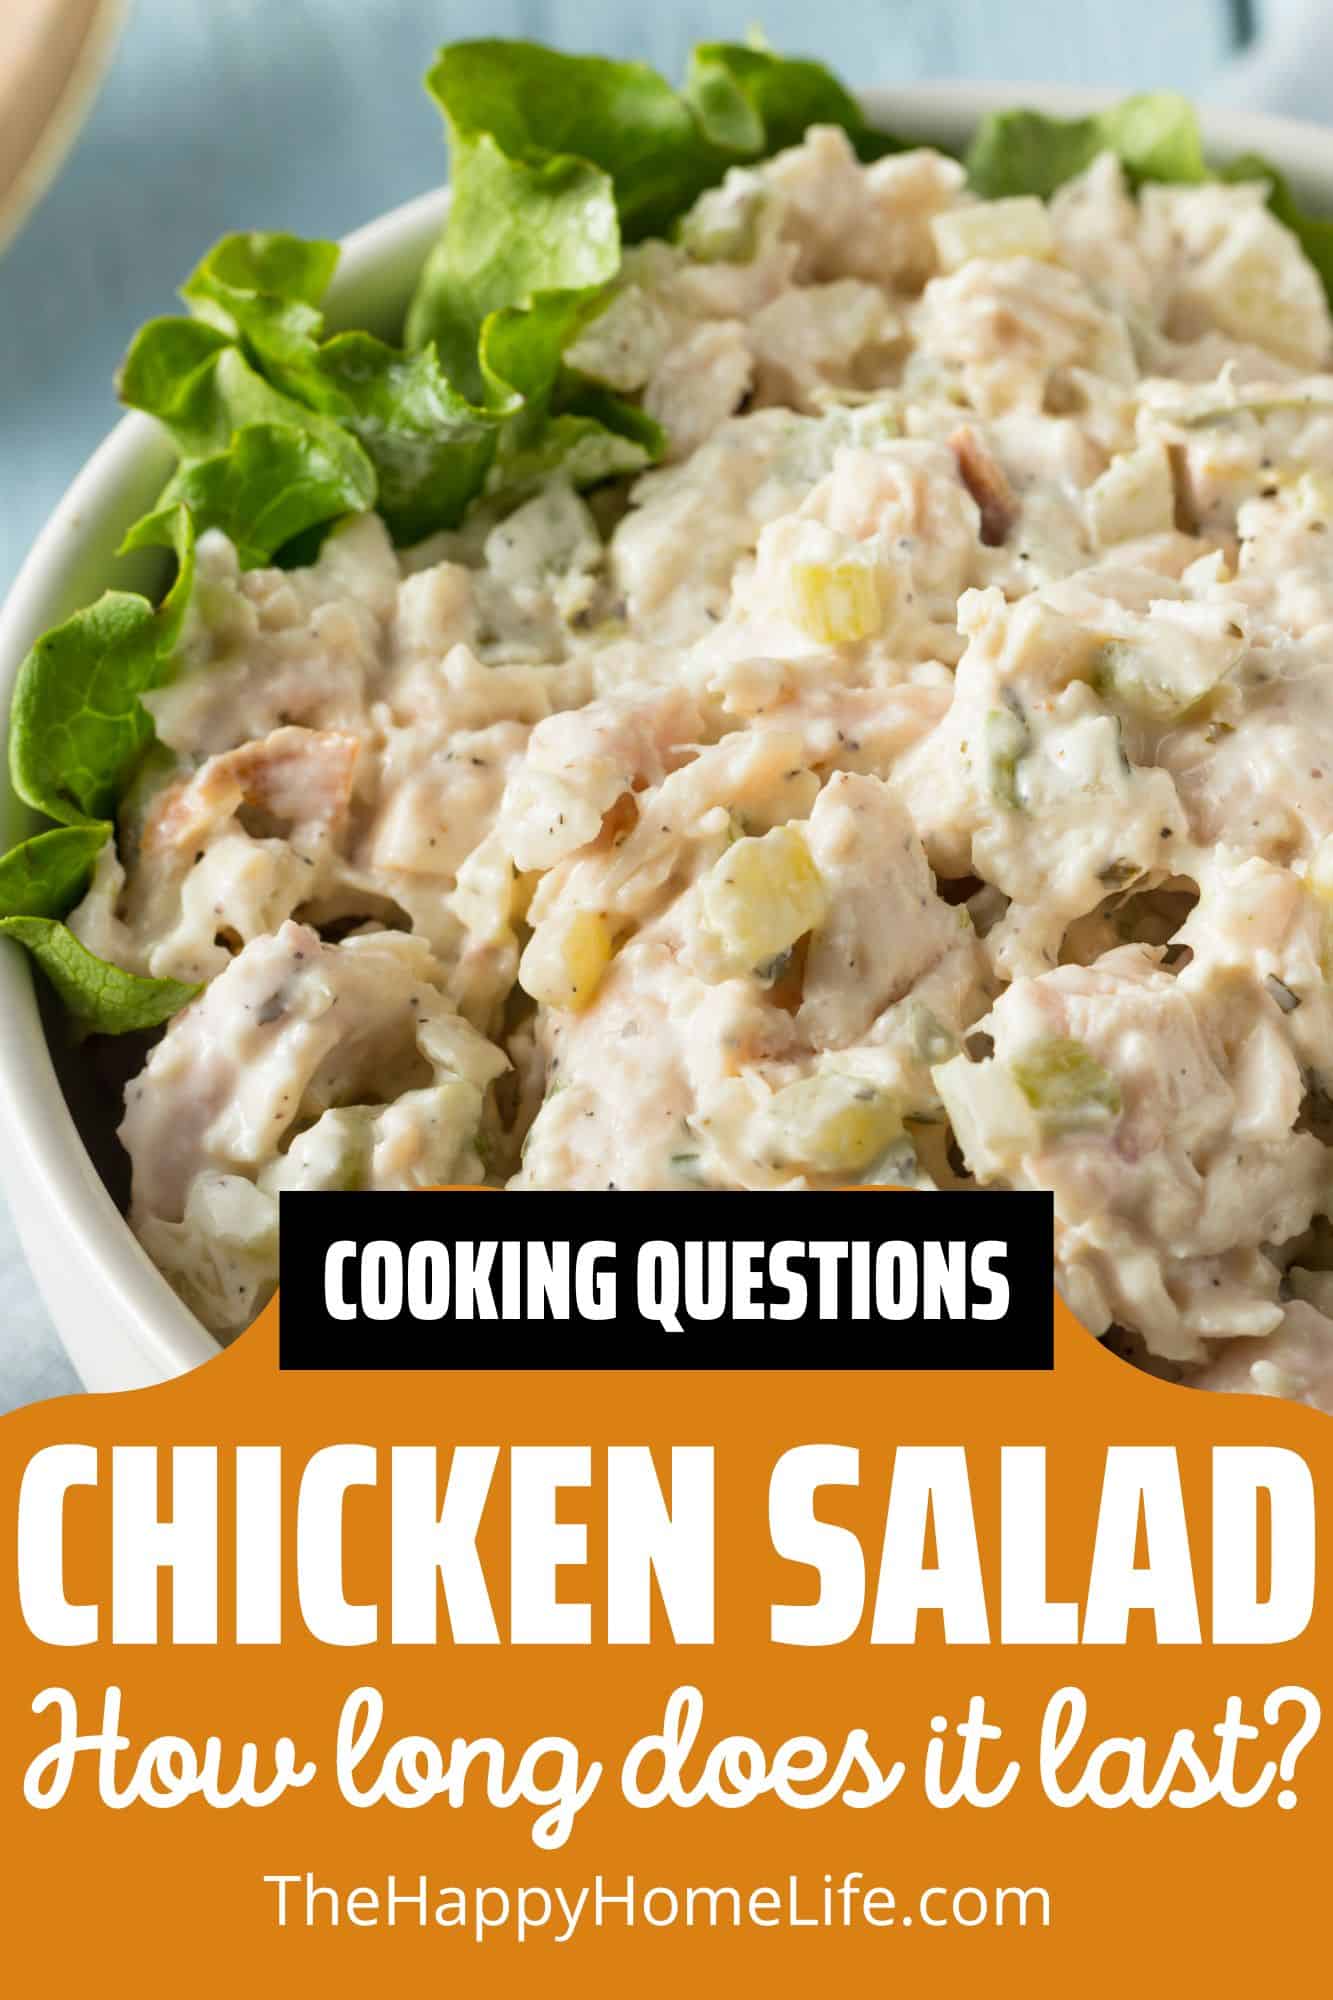 How Long Does Chicken Salad Last? - The Happy Home Life